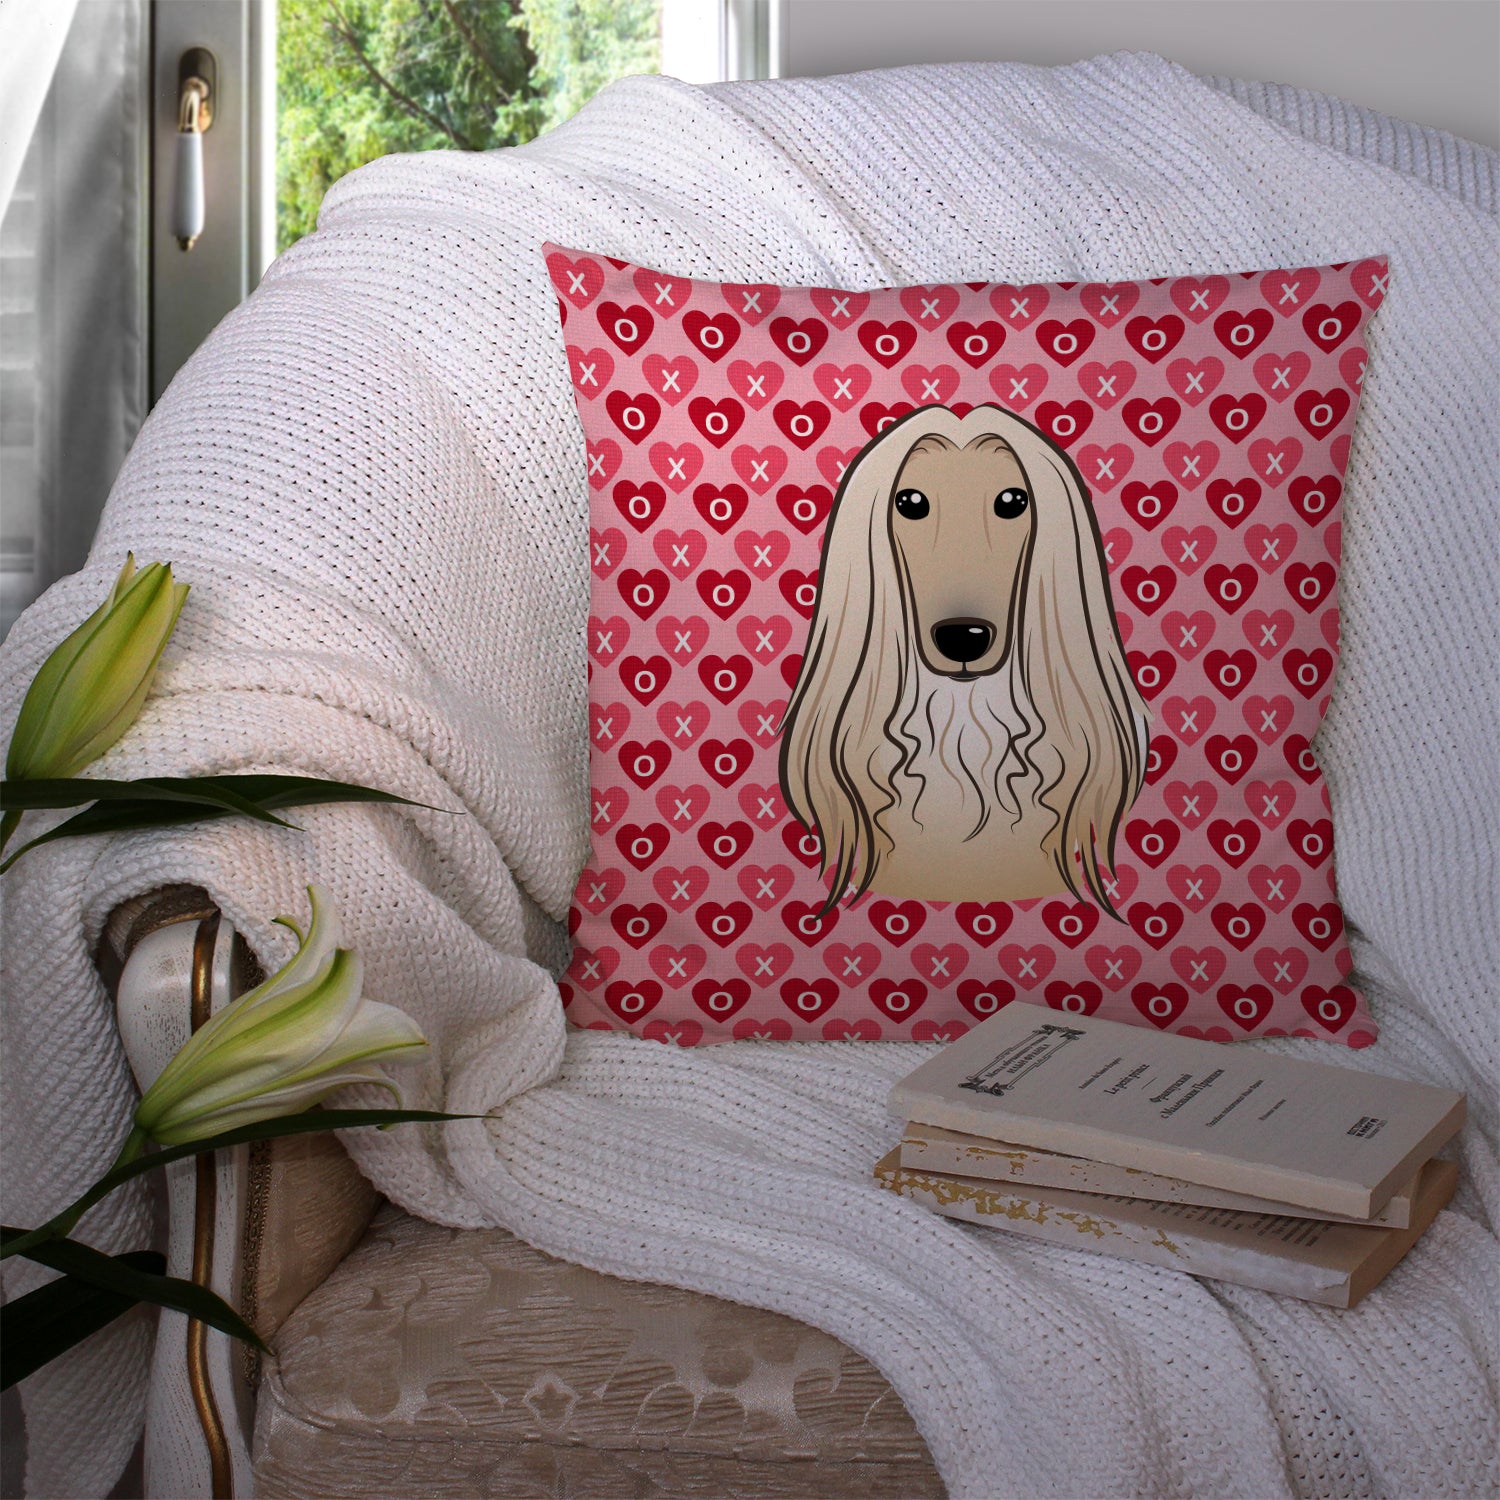 Afghan Hound Hearts Fabric Decorative Pillow BB5314PW1414 - the-store.com